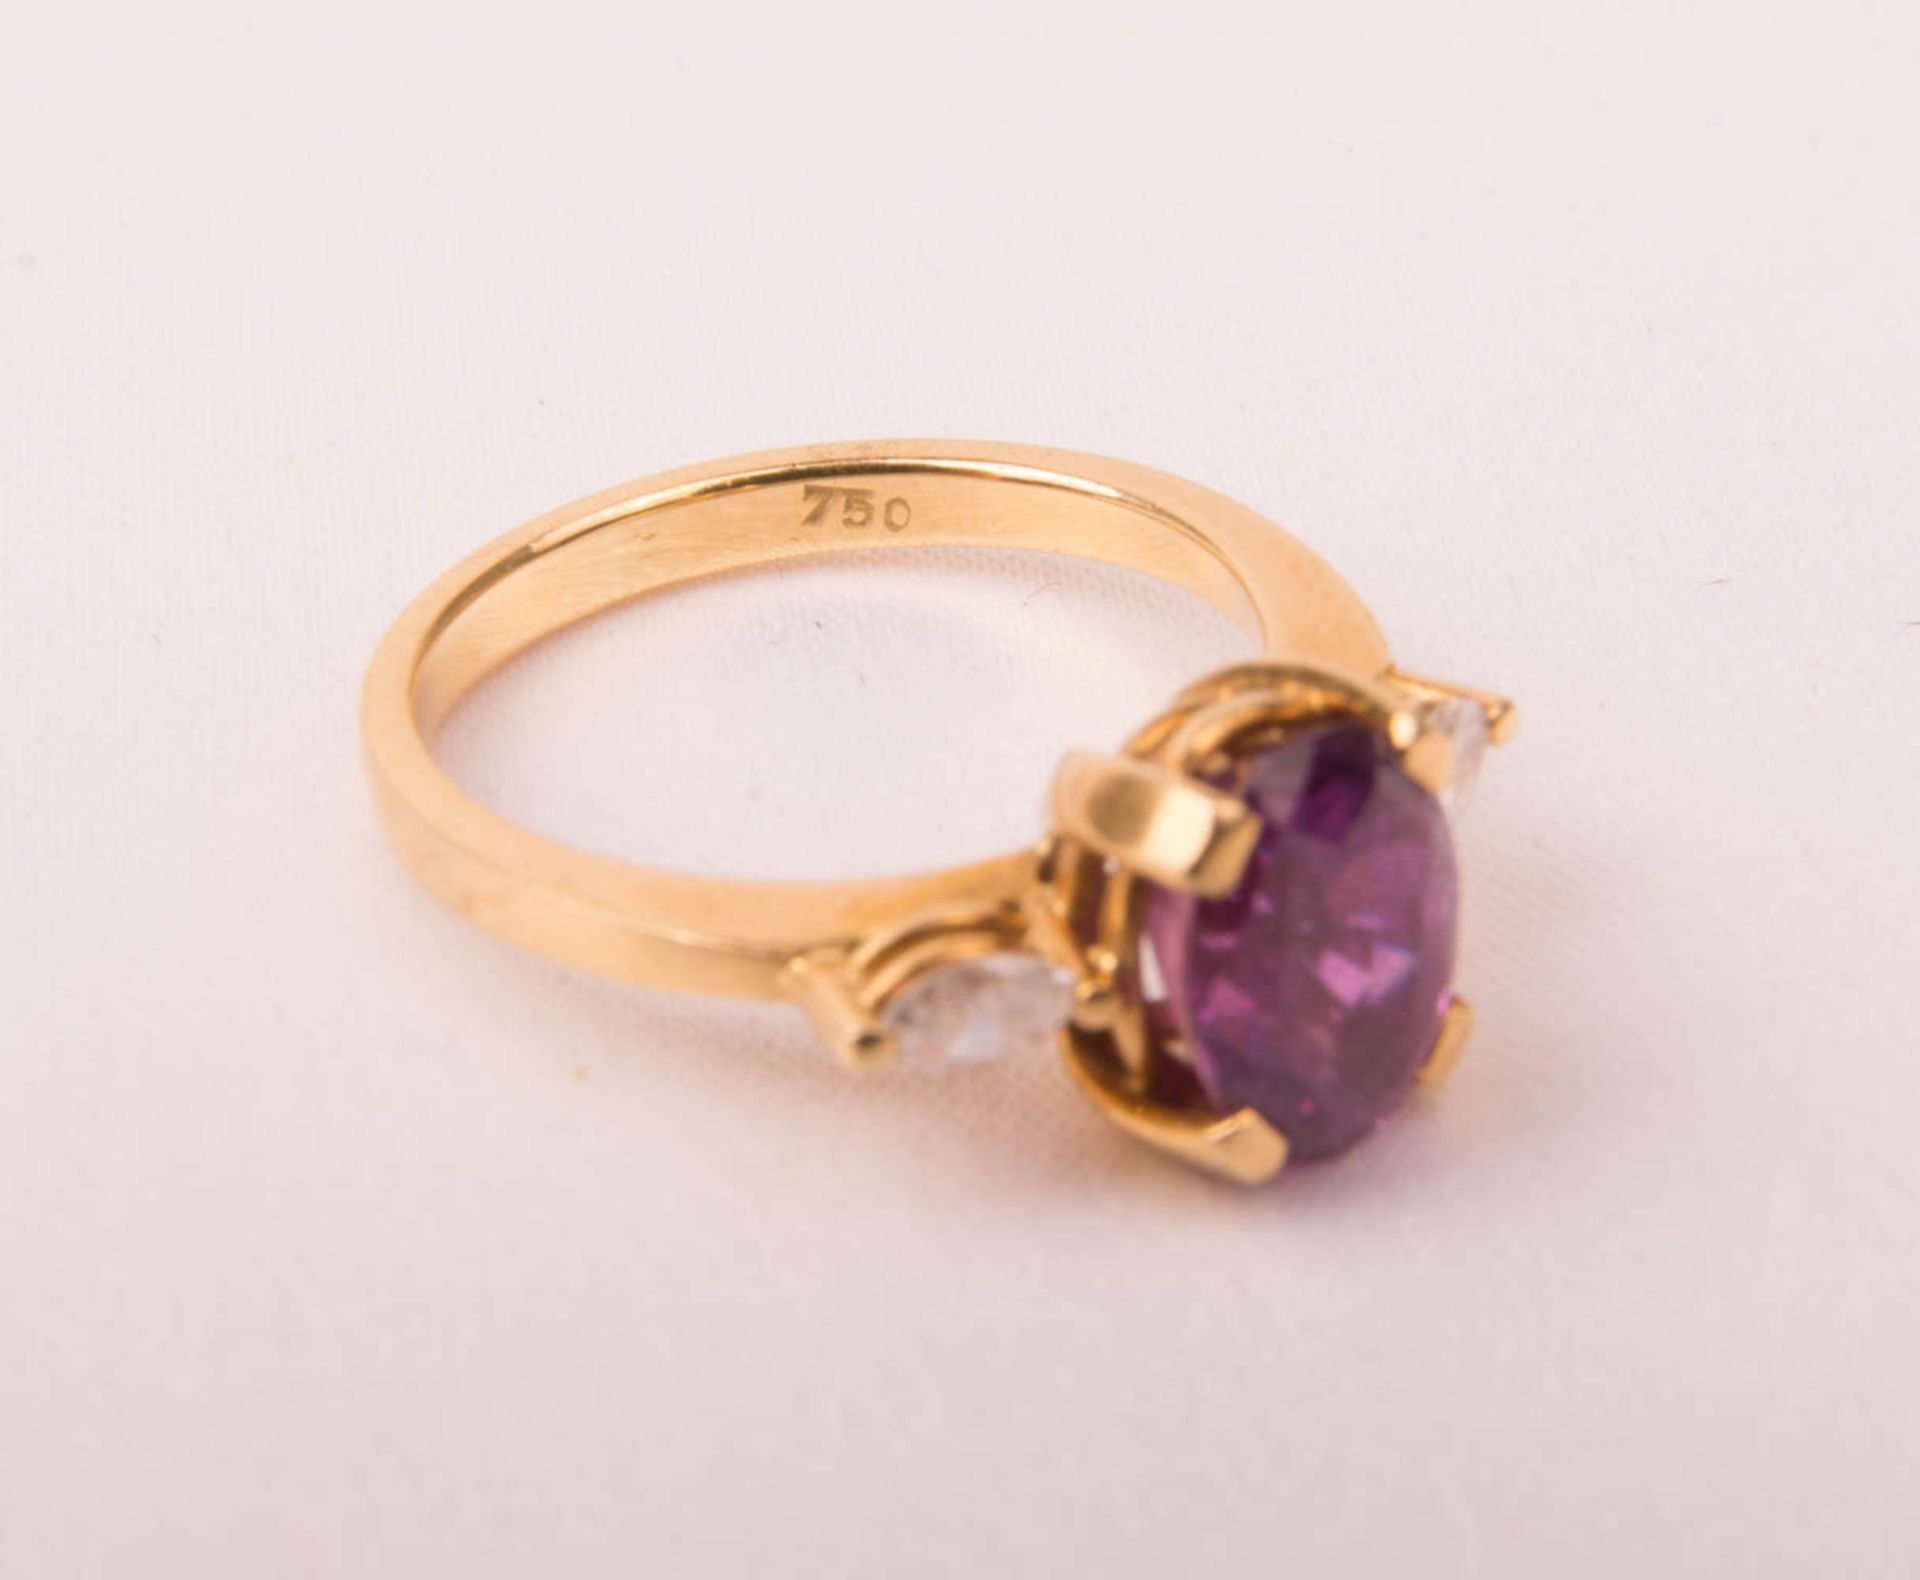 Fine ring with diamonds with large gemstone, 750 yellow gold. - Image 5 of 6